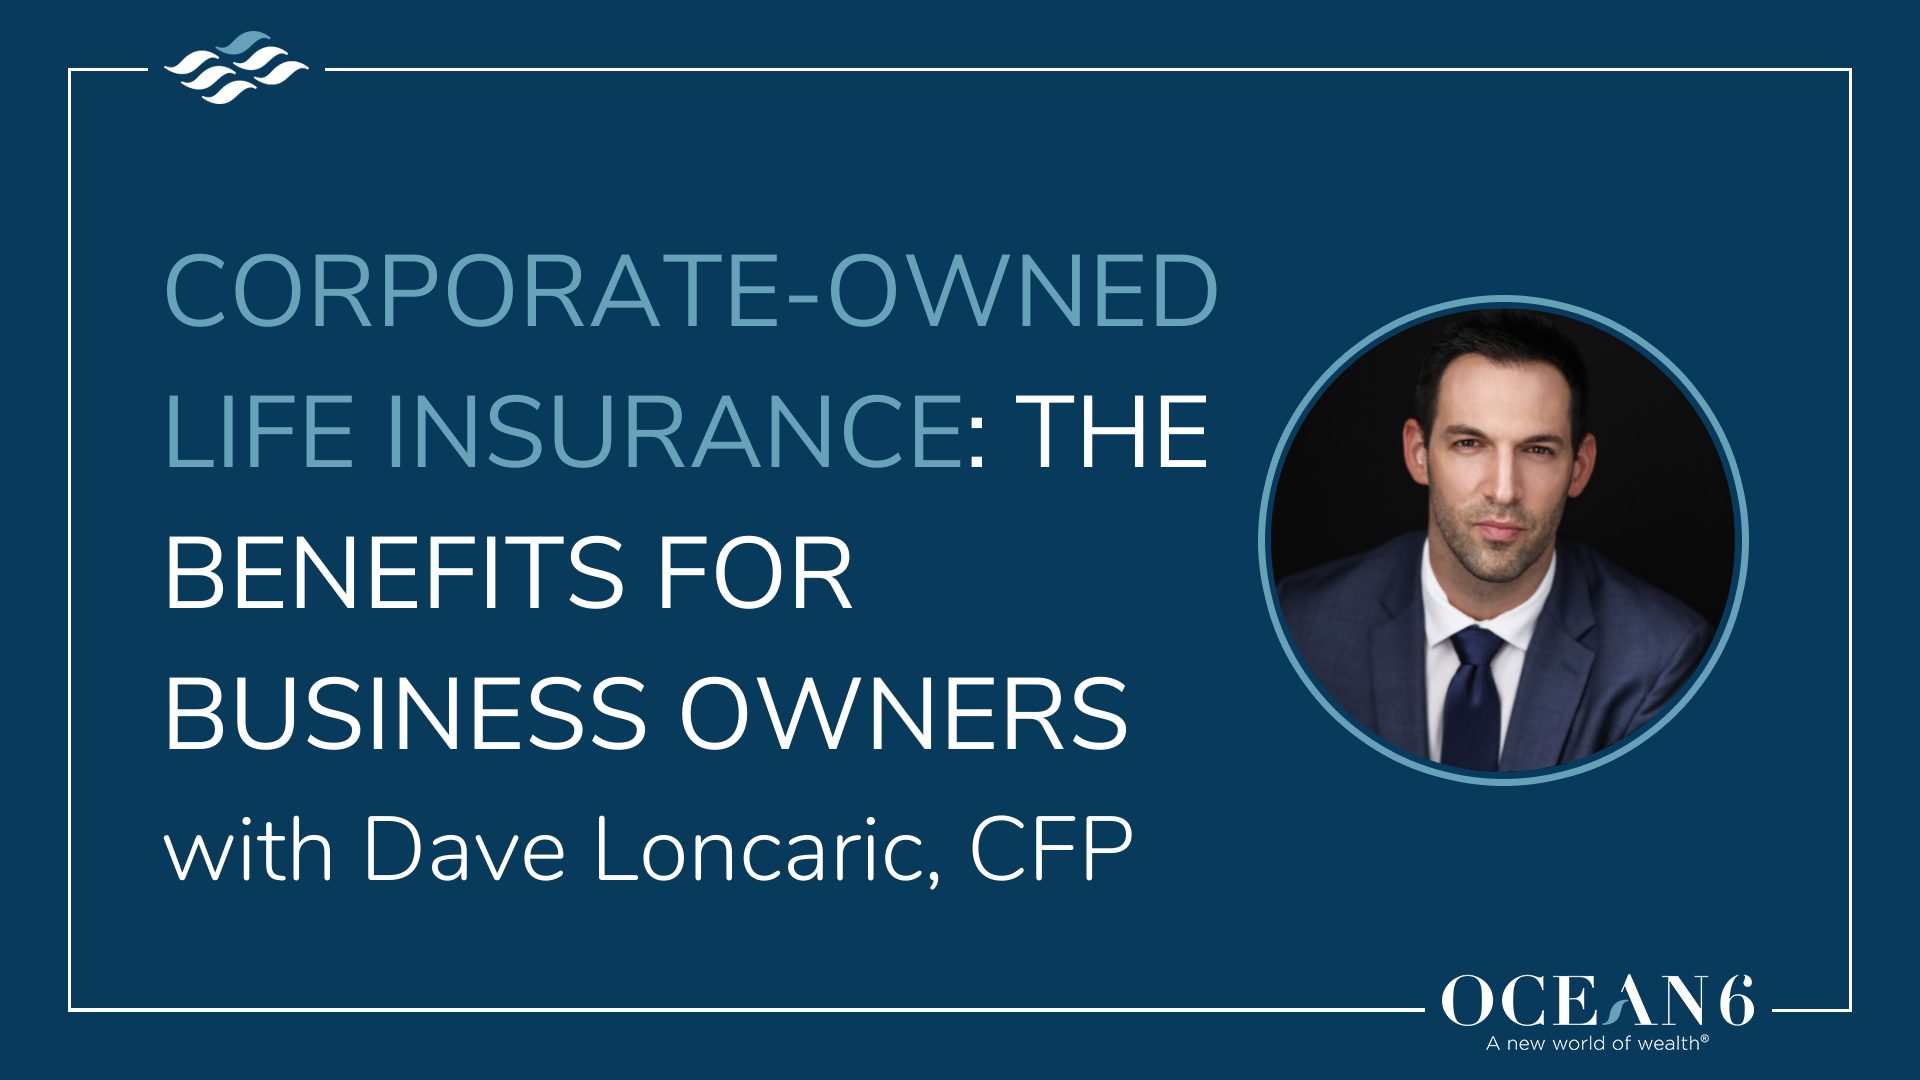 Advisor headshot thumbnail - corporate-owned life insurance: the benefits for business owners